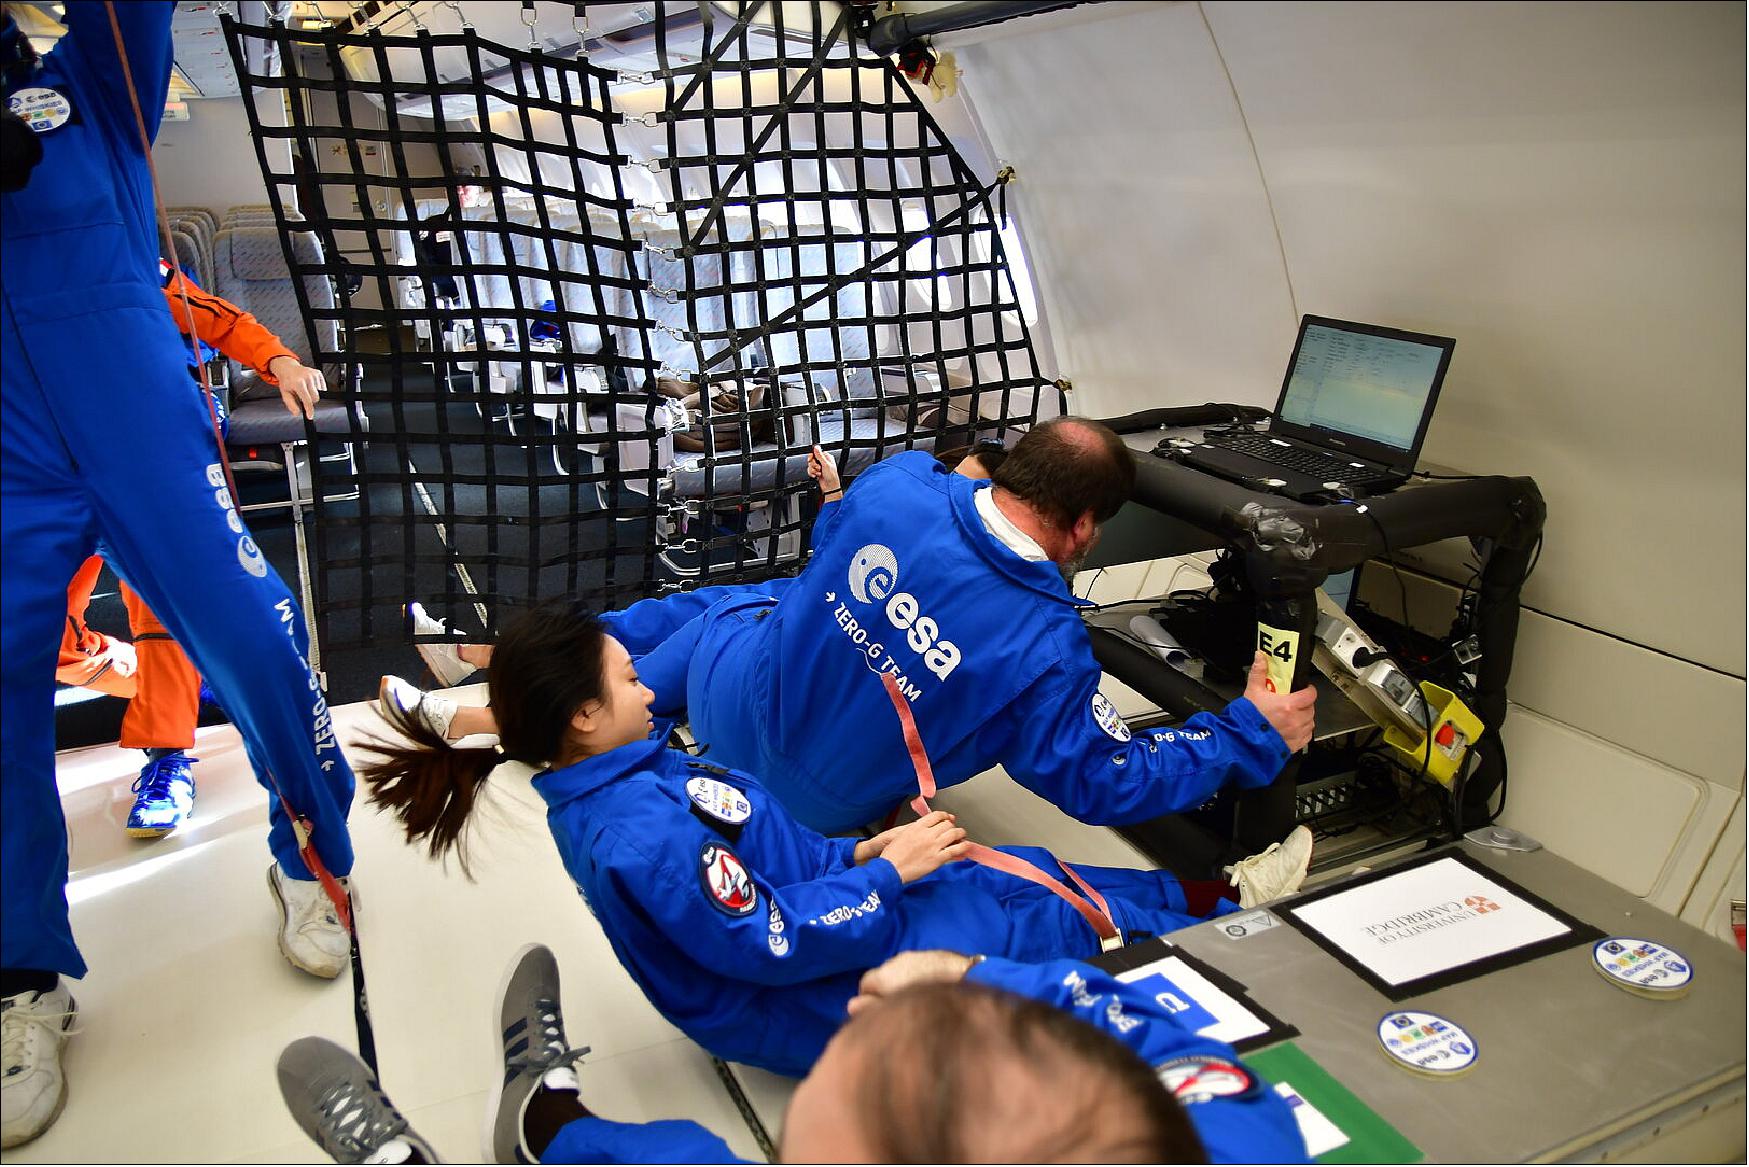 Figure 11: Parabolic flights treat passengers and experiments to a rollercoaster ride, flying angled at 49º 20 times per flight. They are used to conduct short-term scientific and technological investigations in microgravity and reduced gravity, to test instrumentation before use in space, to validate operational and experimental procedures, and to train astronauts for spaceflight. This picture was taken during the first flight day of ESA's 72nd parabolic flight campaign in November 2019 (image credit: ESA, M. Cowan)